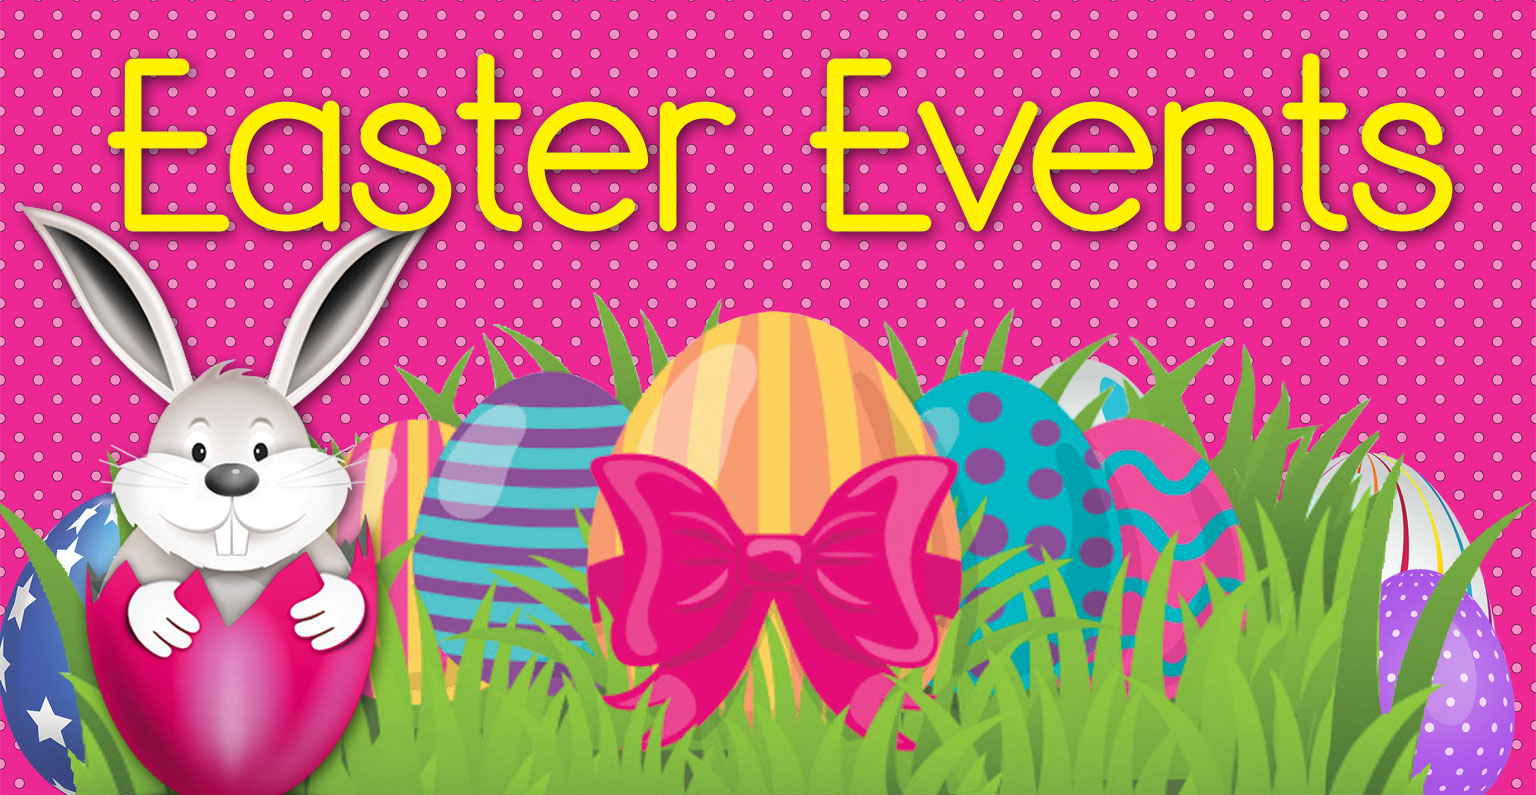 Exciting Easter Events